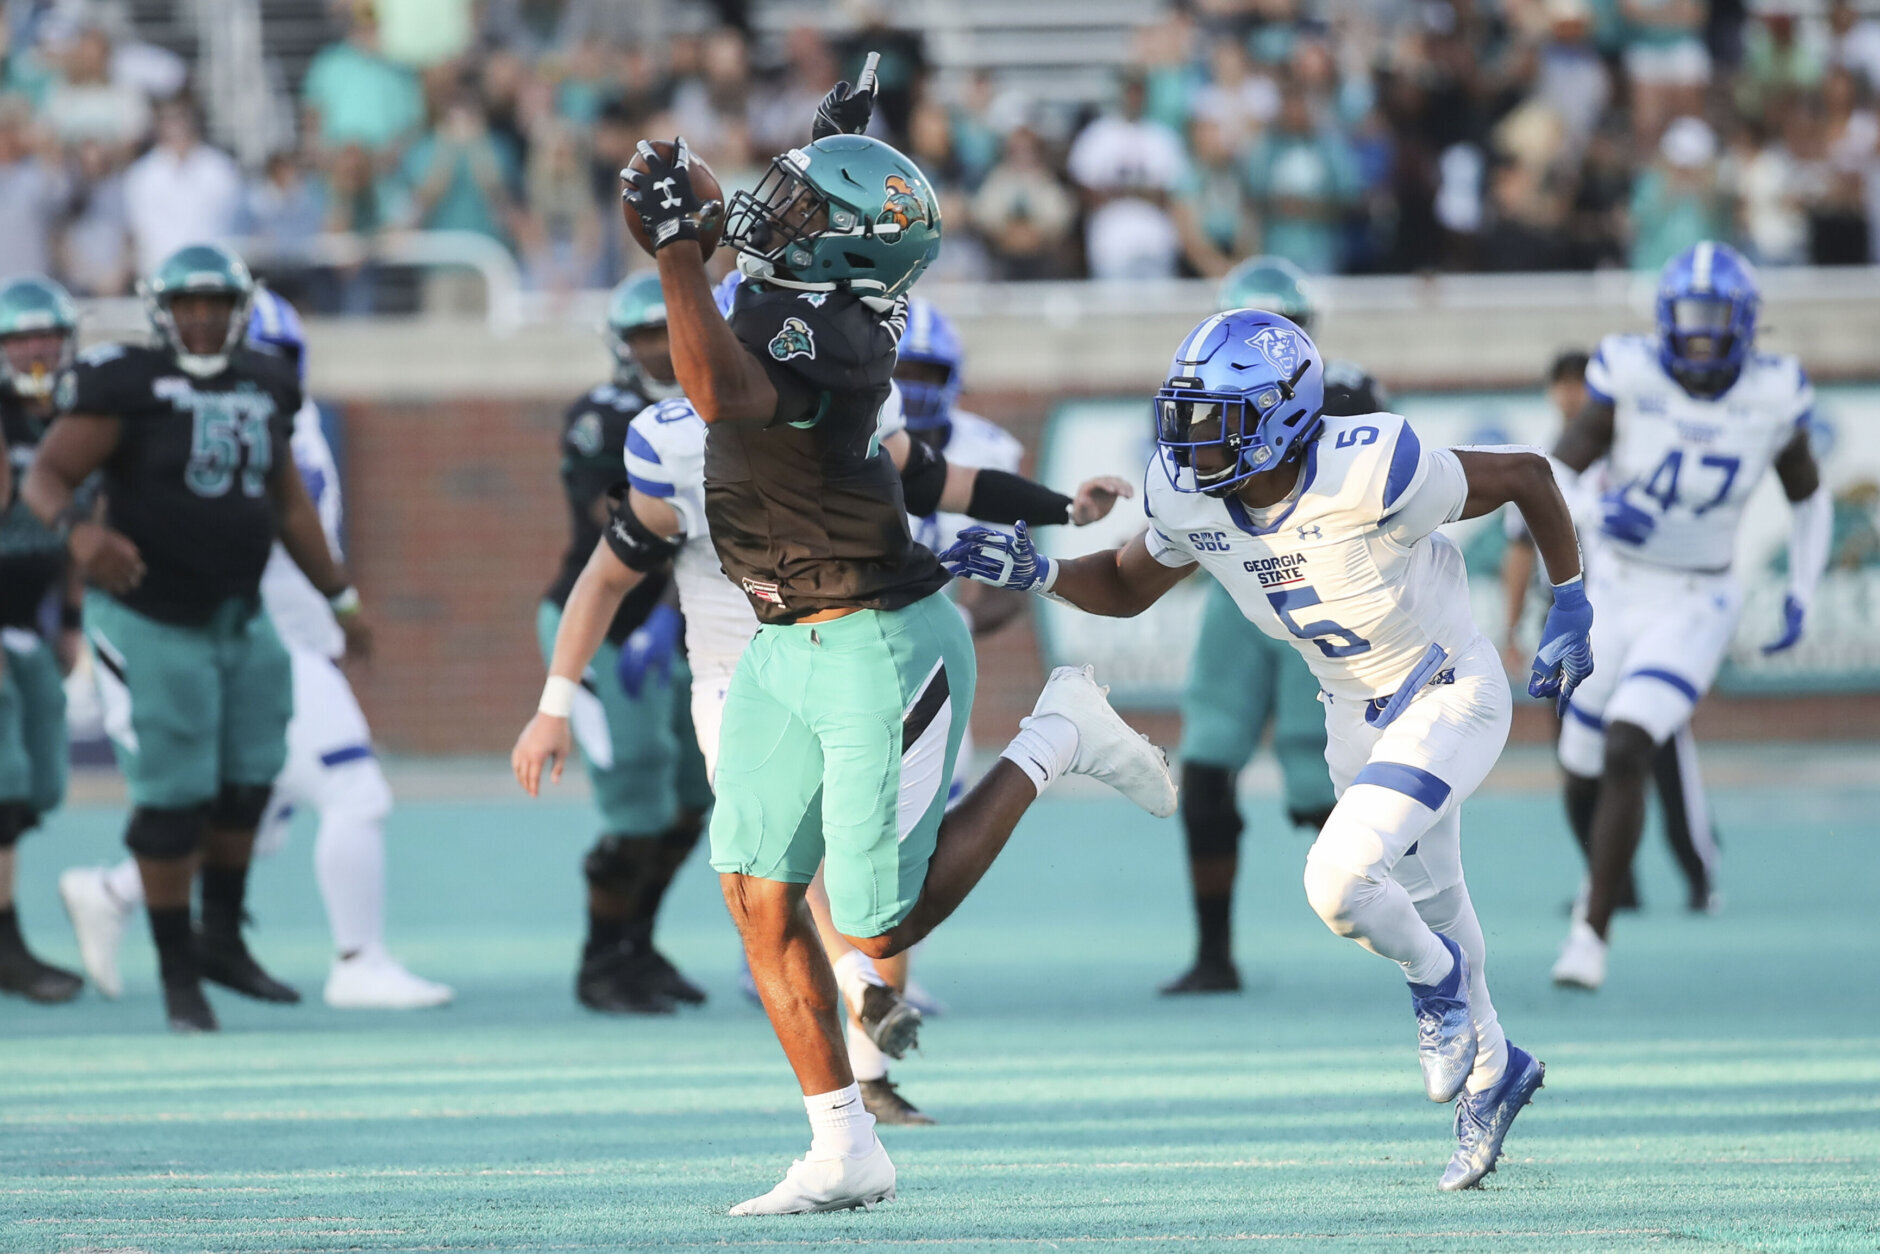 <p><strong>Round 2 (47th overall) &#8212; Isaiah Likely, TE Coastal Carolina</strong></p>
<p>This comes off as a reach because he&#8217;s seen by some as a bit of a project. Likely&#8217;s size and/or blocking ability may be in question at the next level but his intangibles and character fall in line with the kind of player Rivera covets. Likely never had fewer than five touchdown catches in a college season so he could also serve as a strong red-zone alternative to Logan Thomas.</p>
<p>One caveat: Assuming they don&#8217;t get a QB in Round 1, don&#8217;t rule out Washington taking one here if, for some reason, one of the bigger names falls hard (though I seriously doubt any of them will). If Desmond Ridder is still available at No. 47, I&#8217;m enthusiastically sprinting (borderline frolicking, really) to the podium with his name on it, giggling like a schoolgirl the whole way. But I can&#8217;t see him lasting past Pittsburgh at No. 20 or Detroit at No. 32.</p>
